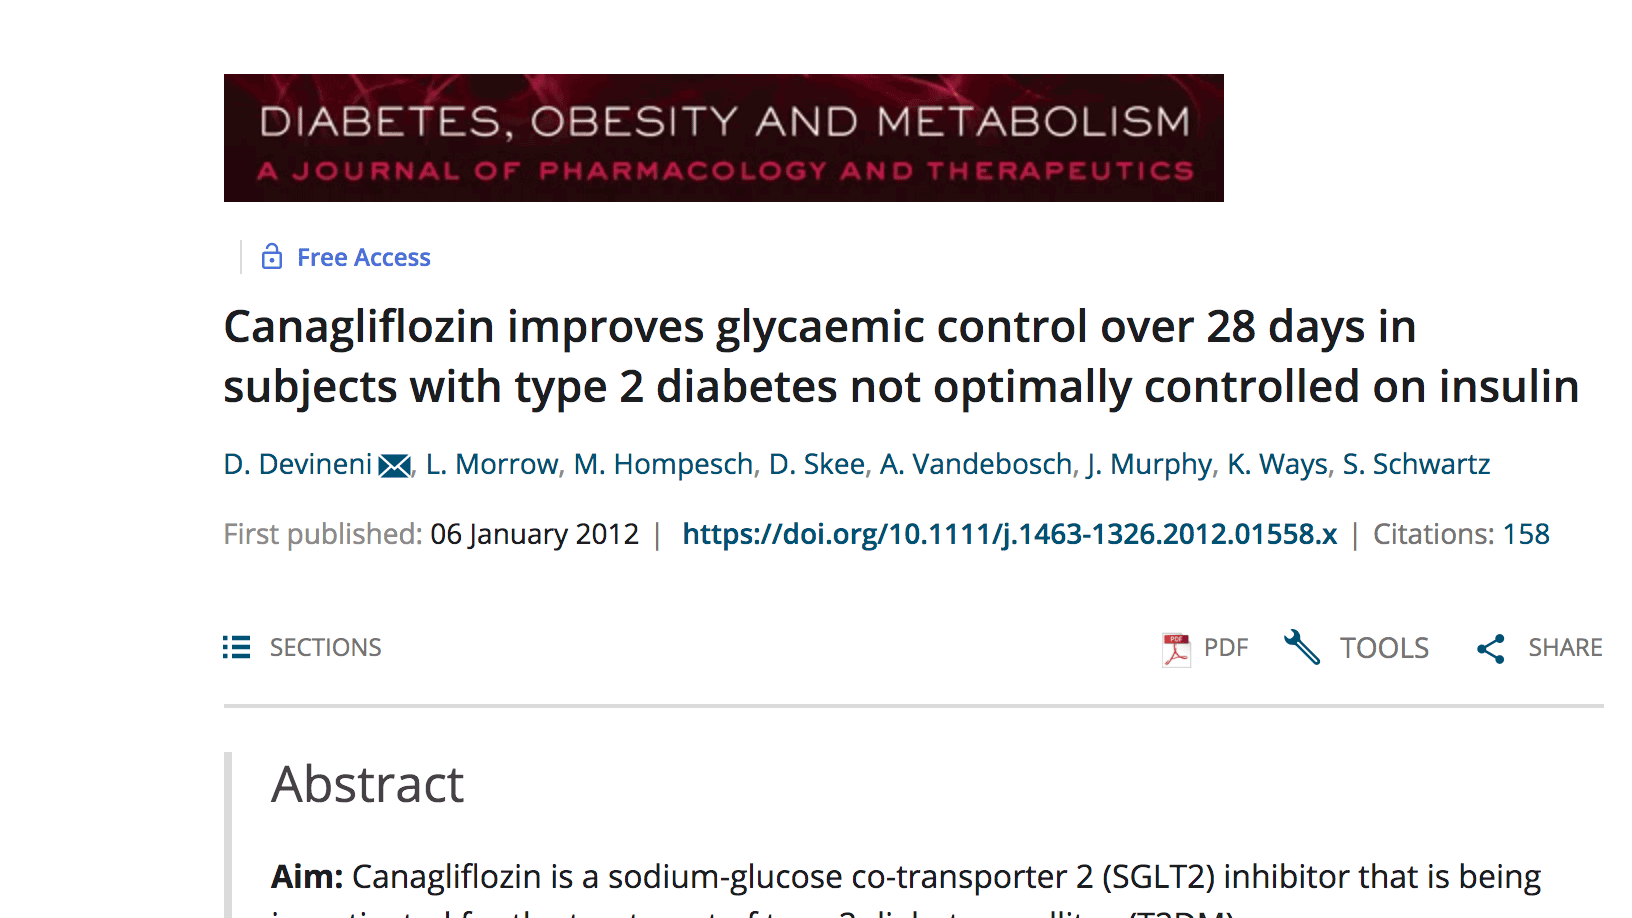 image of Canagliflozin improves glycaemic control over 28 days in subjects with type 2 diabetes not optimally controlled on insulin.